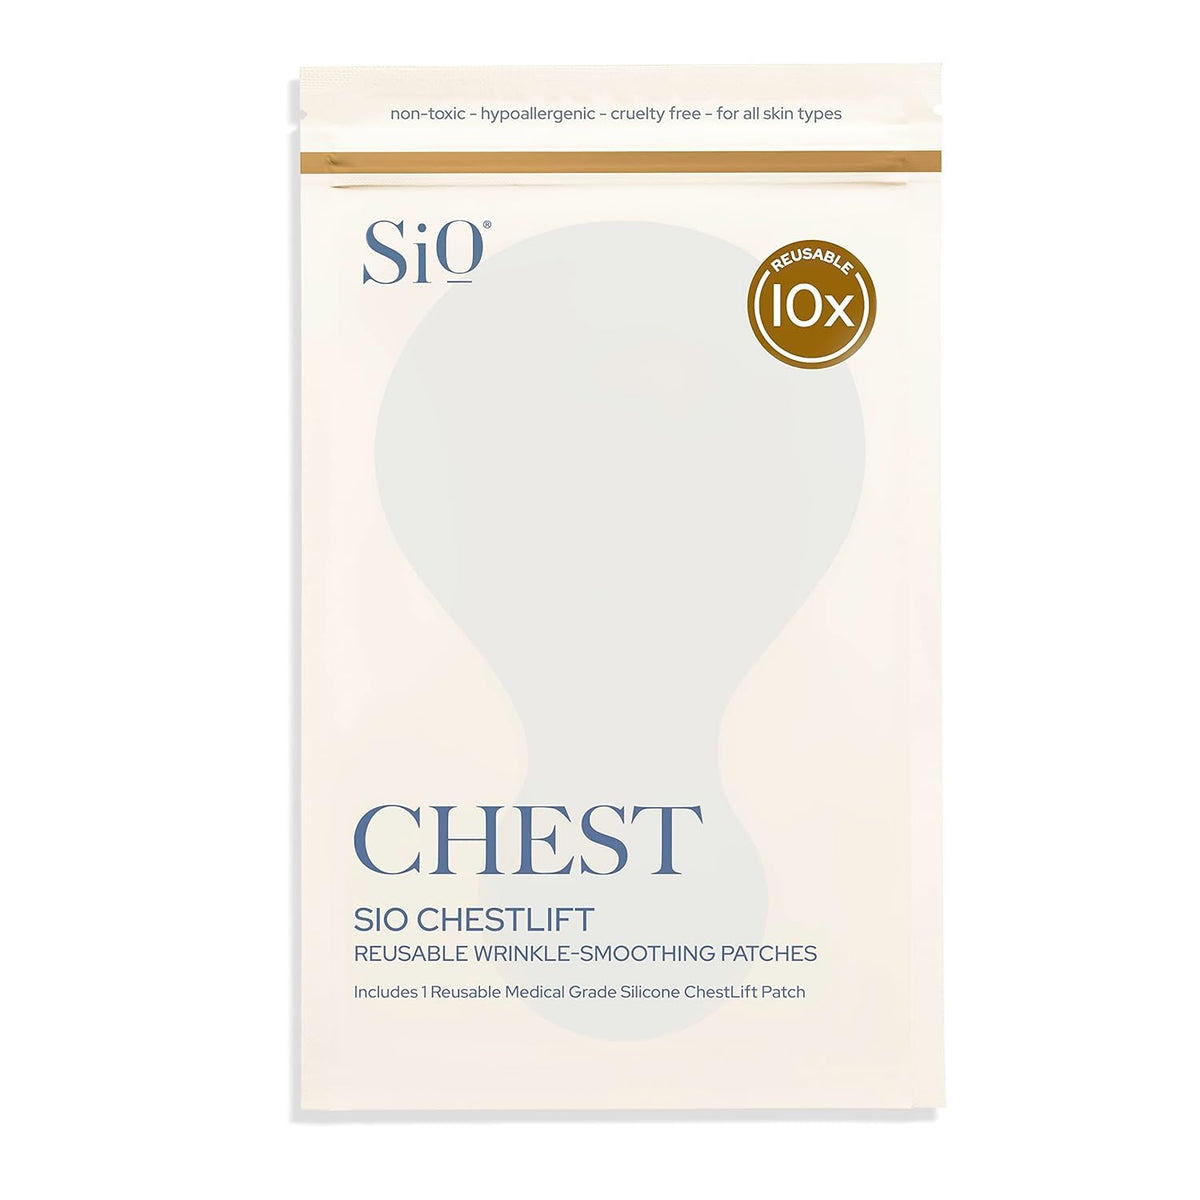 Chest Sio Chestlift Reusable Wrinkle Smoothing Patches